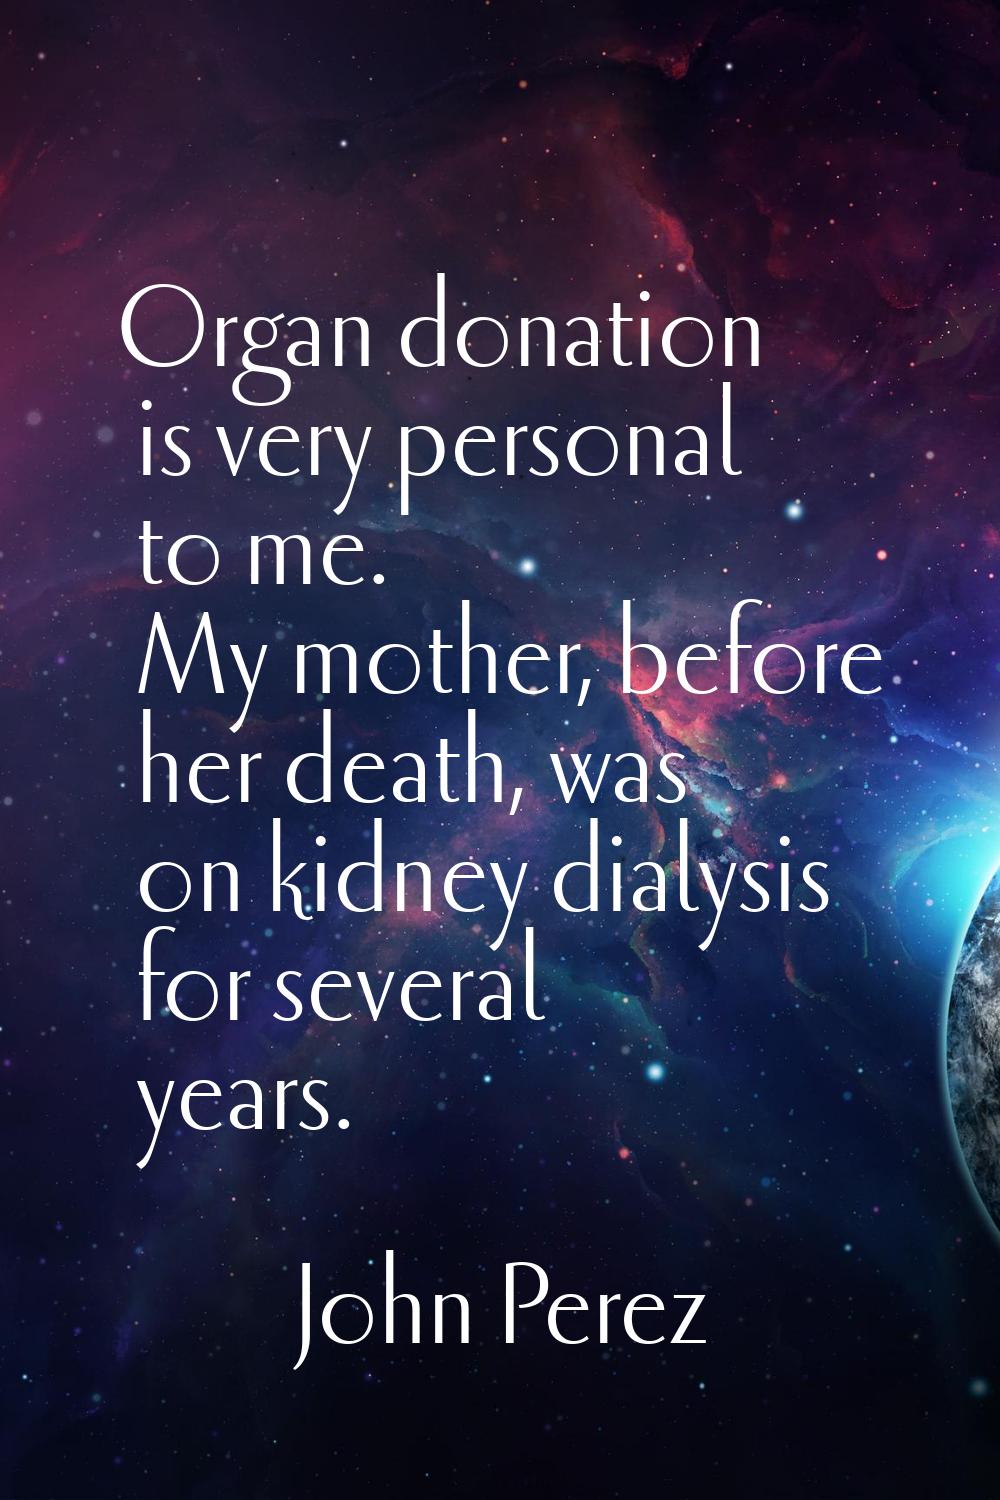 Organ donation is very personal to me. My mother, before her death, was on kidney dialysis for seve